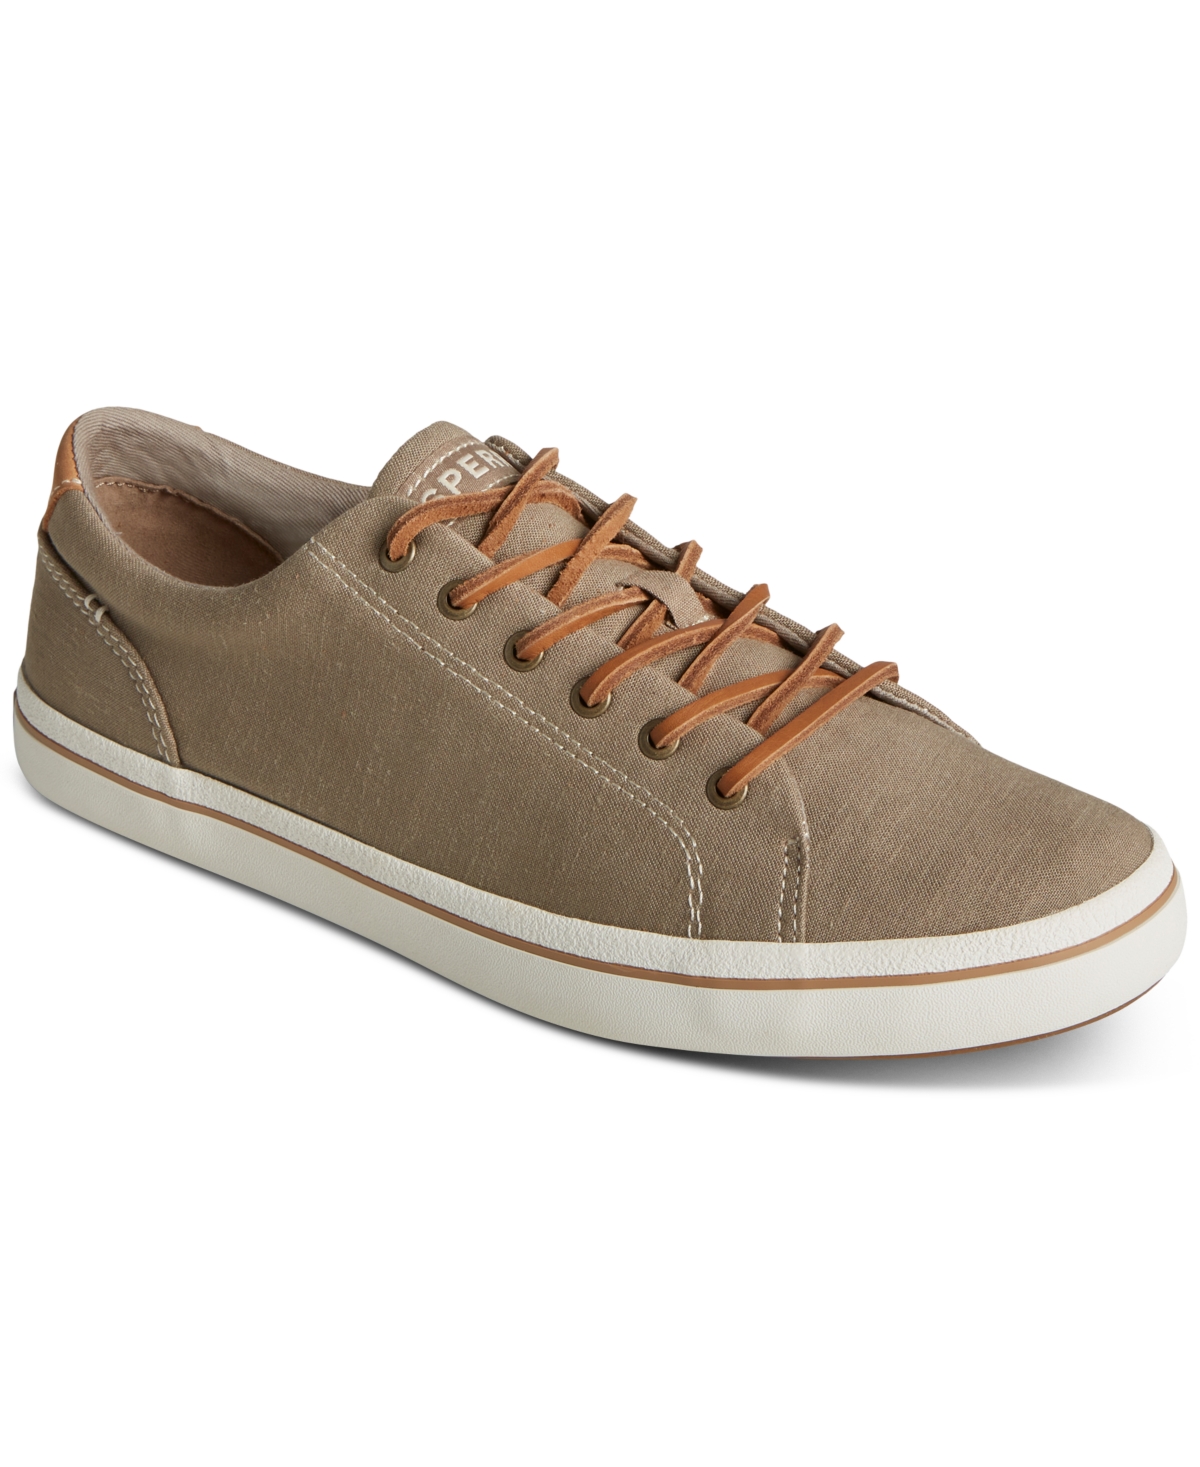 Men's Striper Ii Cvo Preppy Lace-Up Sneakers - Taupe